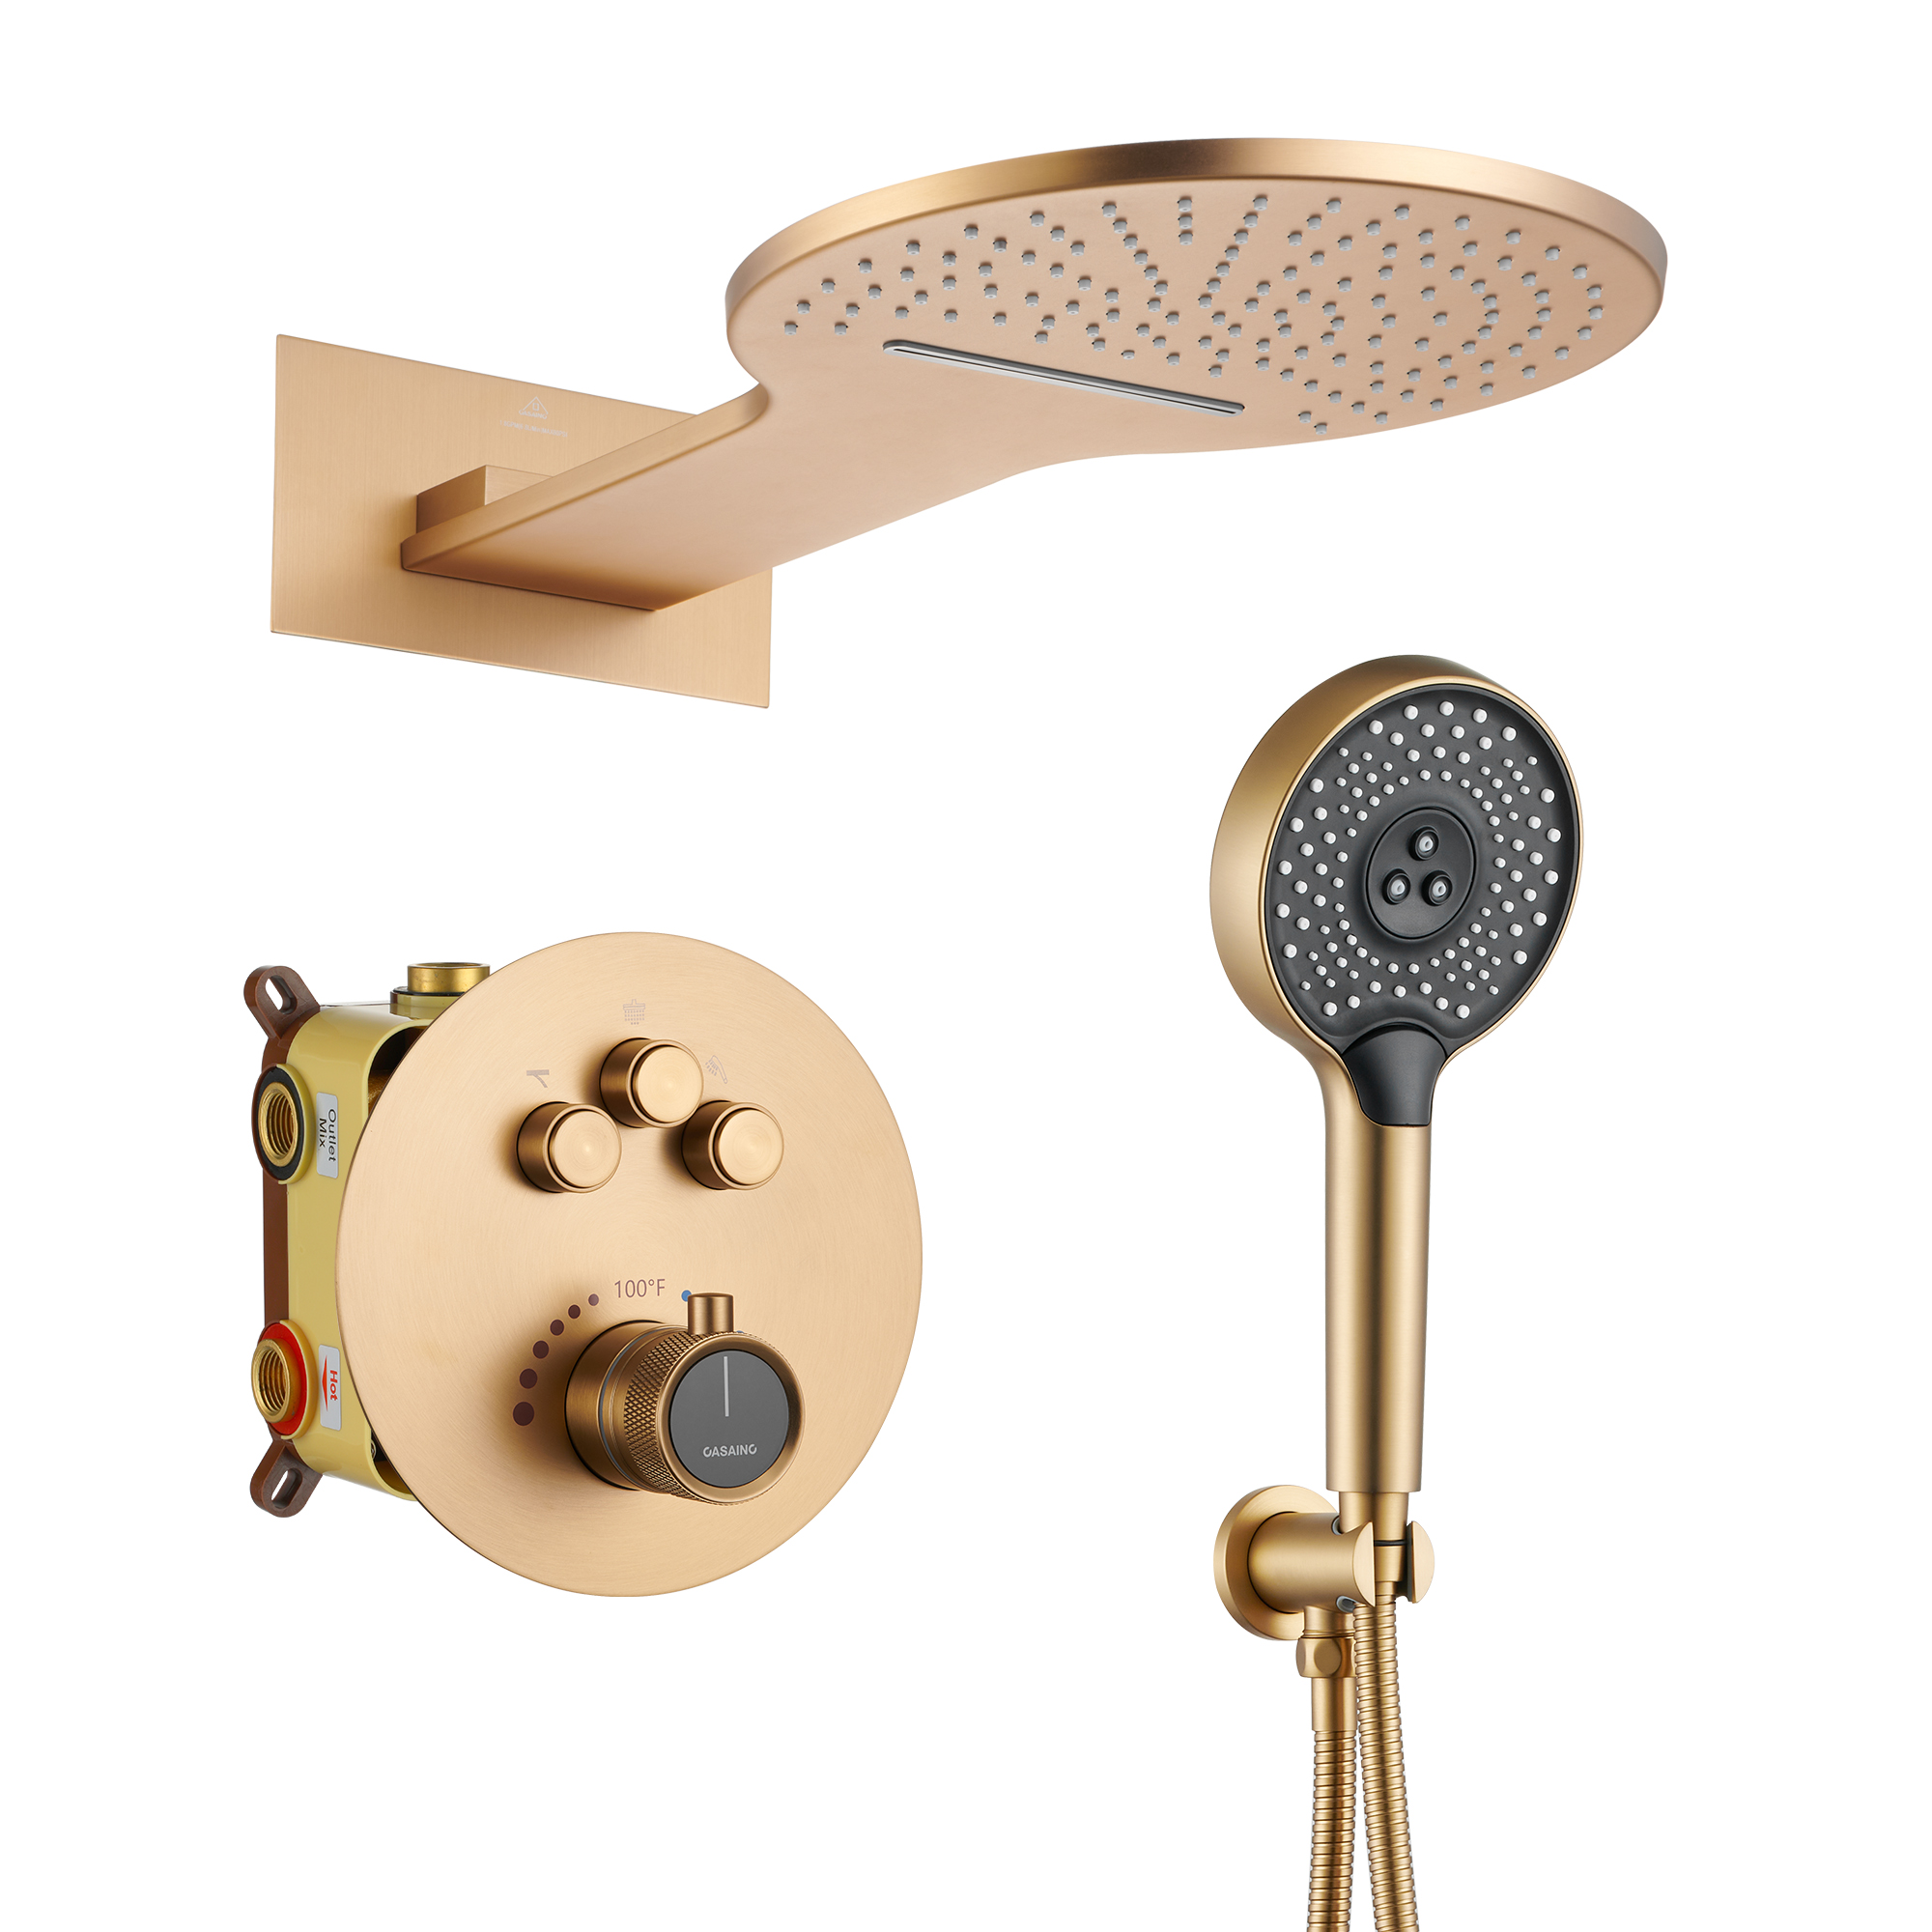 Electroplated Coating Technology Rain Shower Head 22-inch Thermostatic Rainfall & Waterfall Slimline Showerhead Gold Shower System, hand showers for spa like experience (valve included)